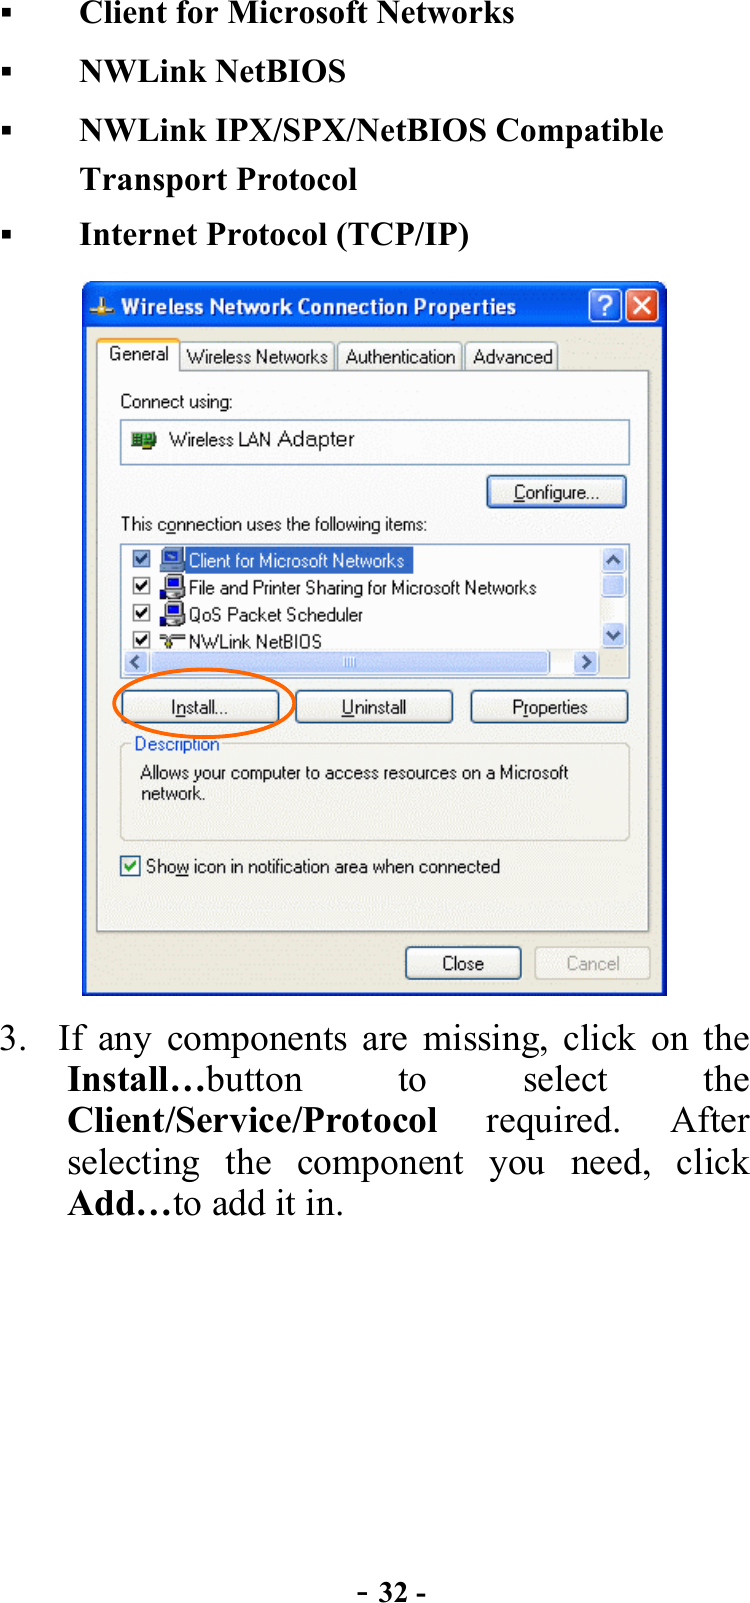  - 32 -   Client for Microsoft Networks   NWLink NetBIOS   NWLink IPX/SPX/NetBIOS Compatible Transport Protocol   Internet Protocol (TCP/IP)  3.  If any components are missing, click on the Install…button to select the Client/Service/Protocol required. After selecting the component you need, click Add…to add it in. 